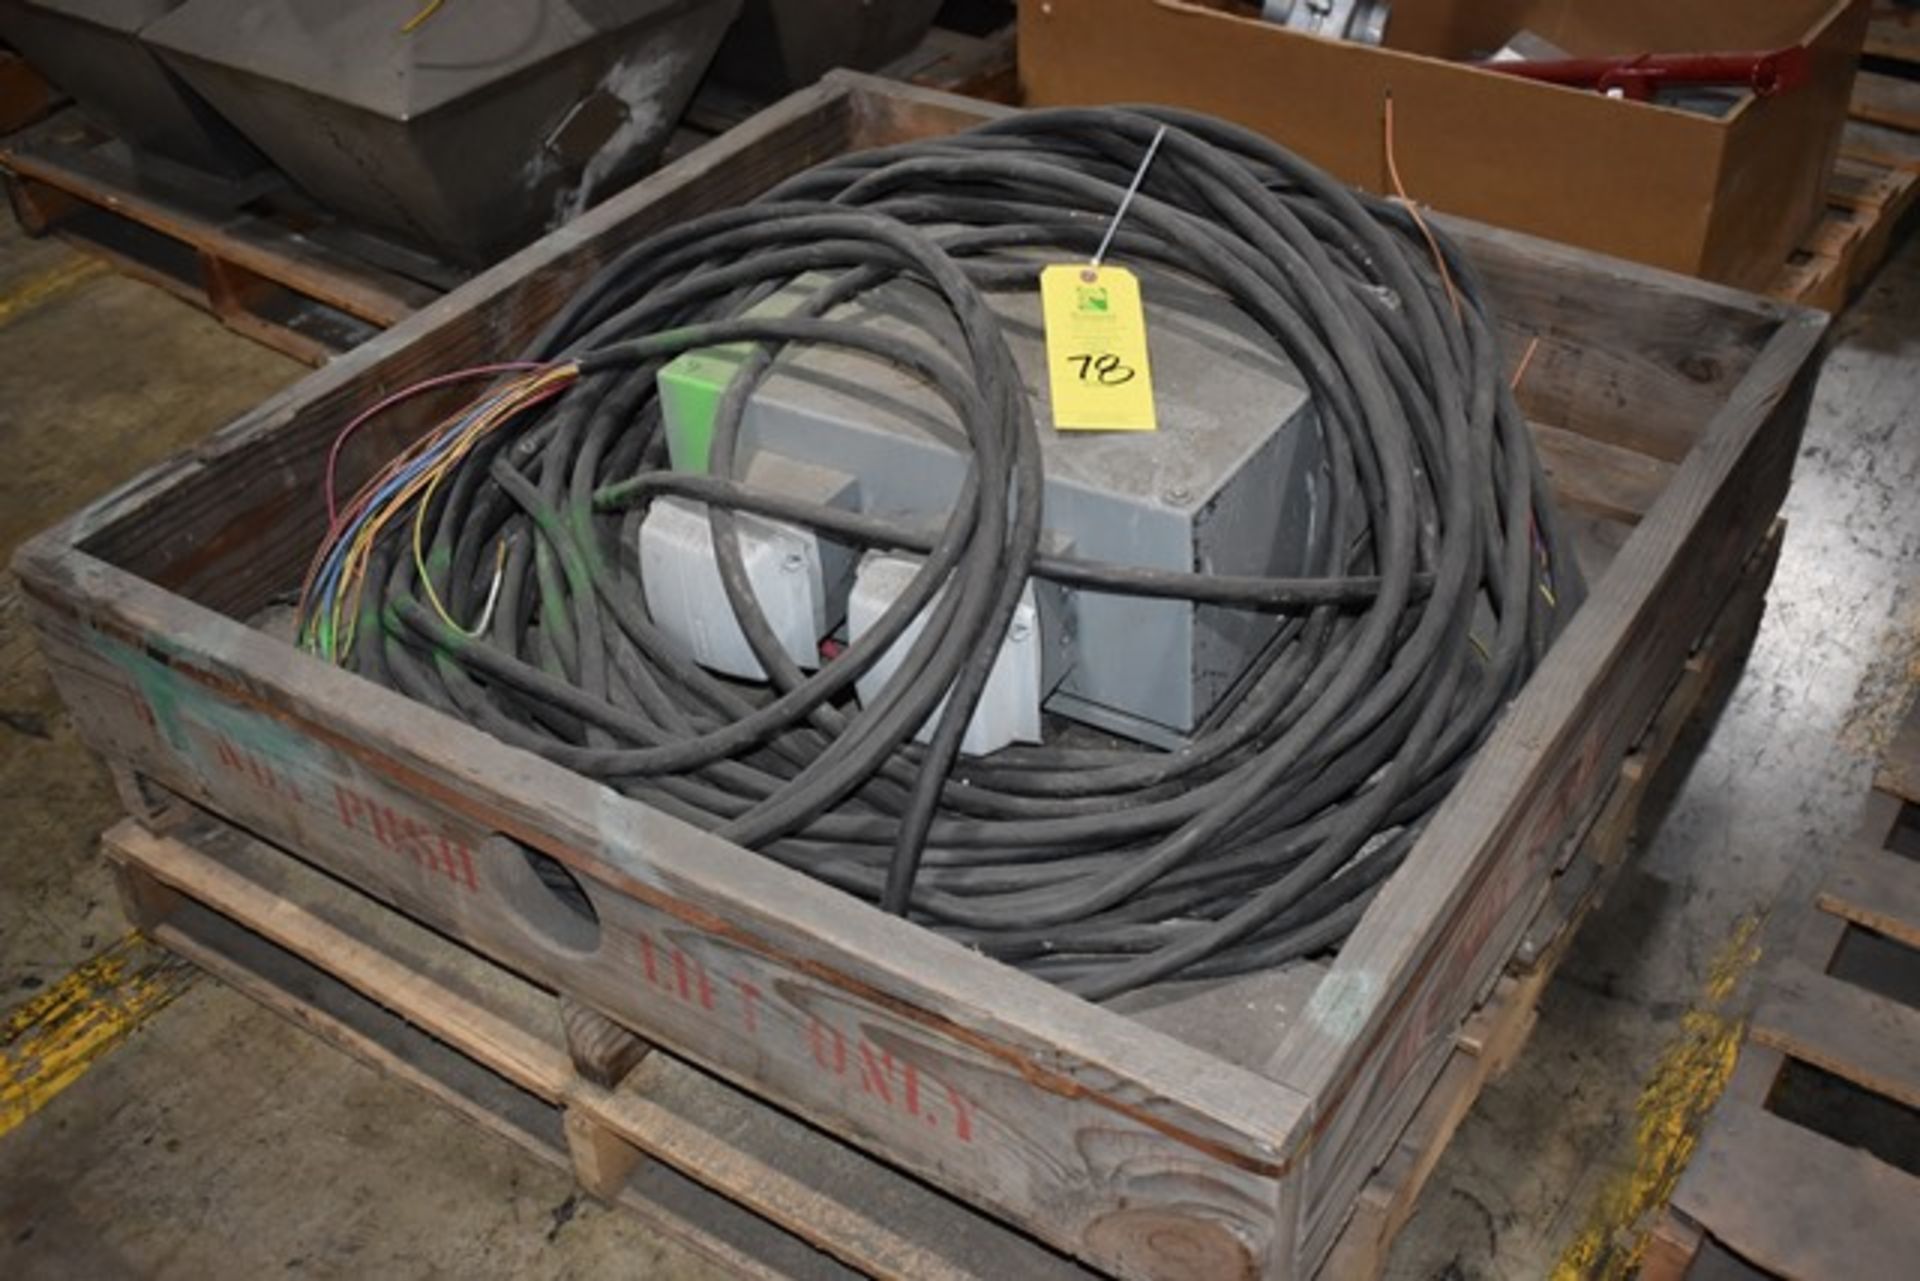 Plant Support - Believed Transformer & Wire Cable. Rigging/Loading Fee: $25